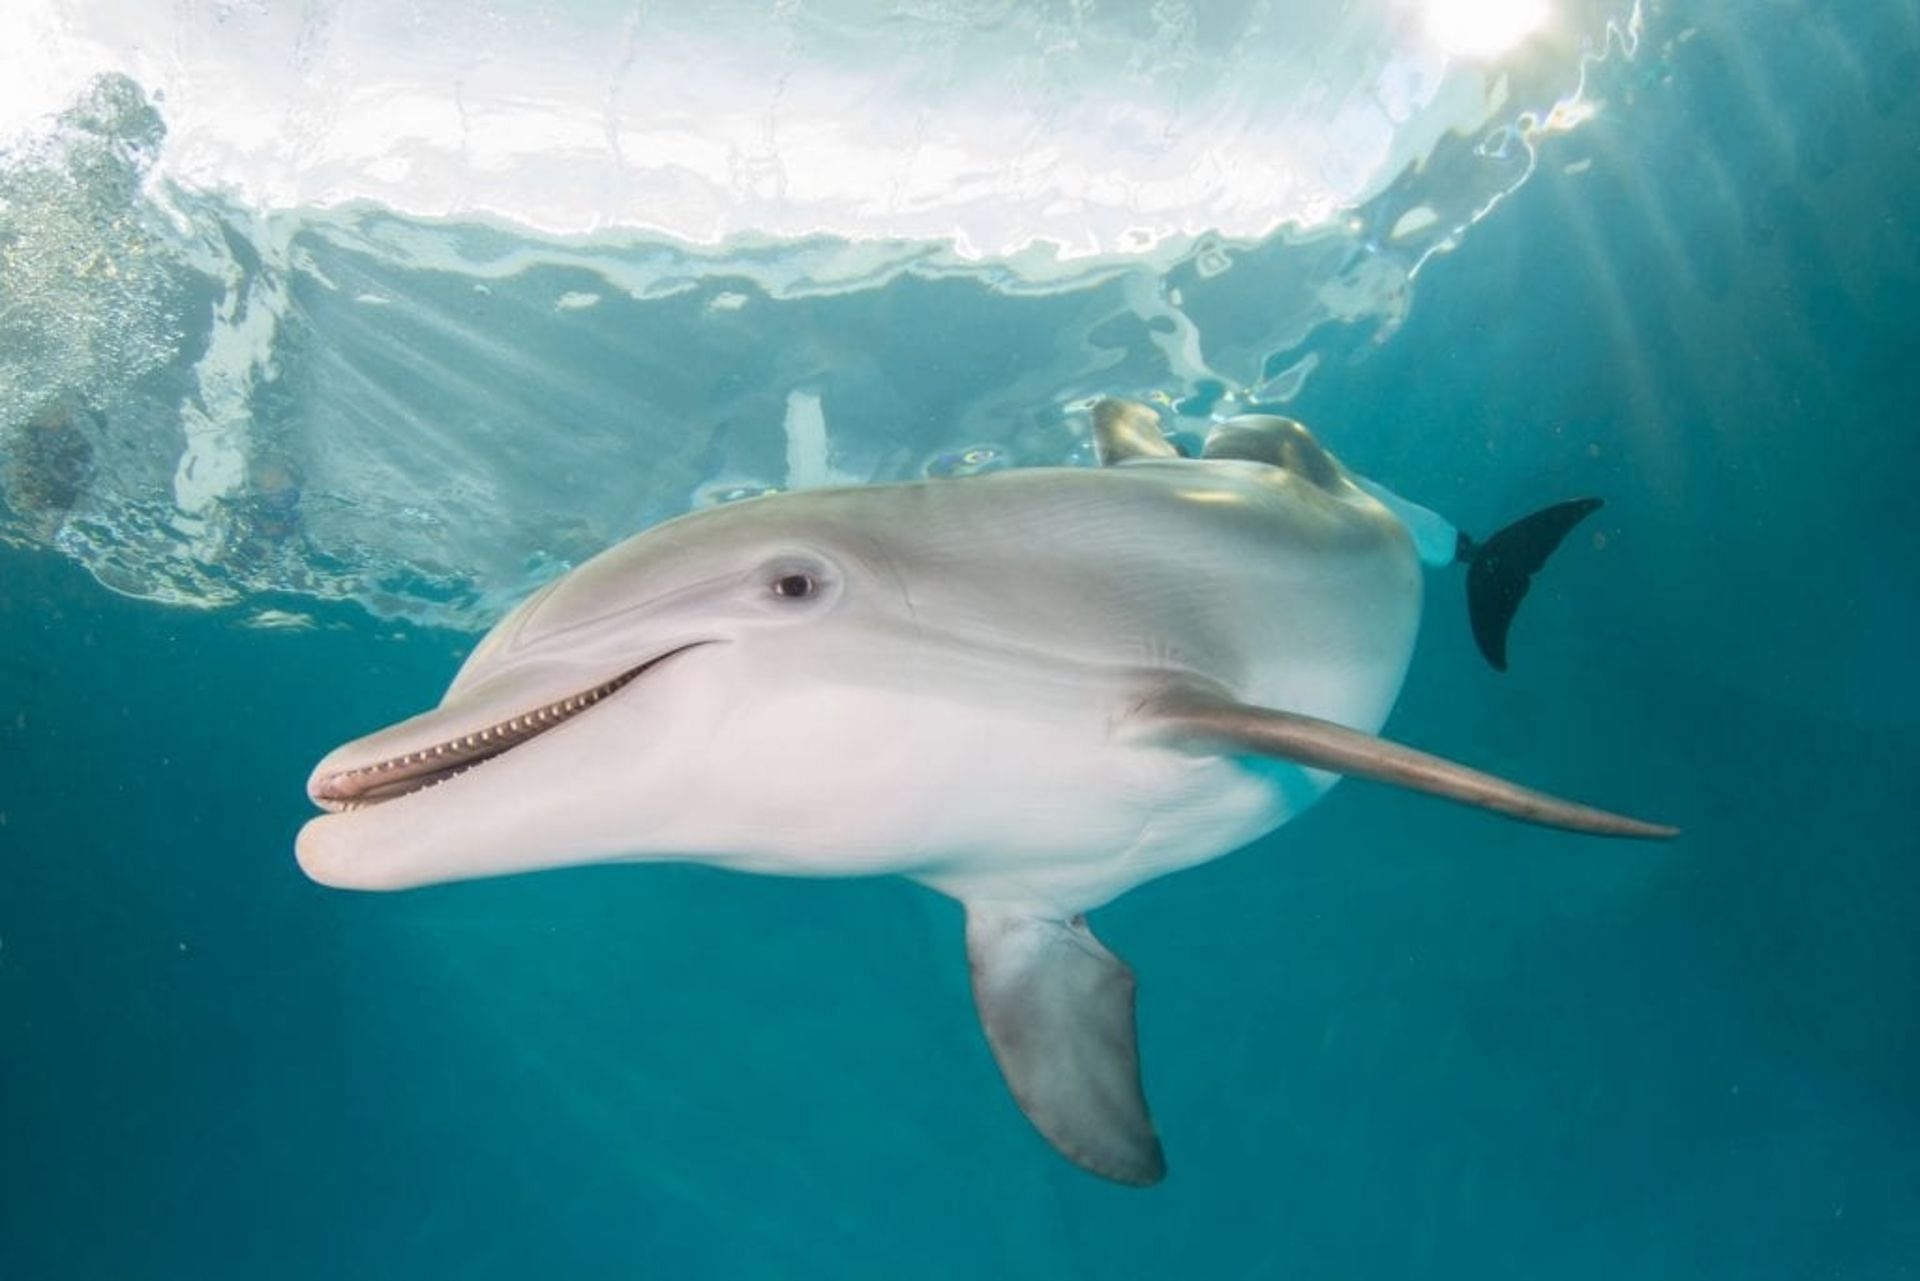 Winter, the late Dolphin (Image via Clearwater Marine Aquarium)